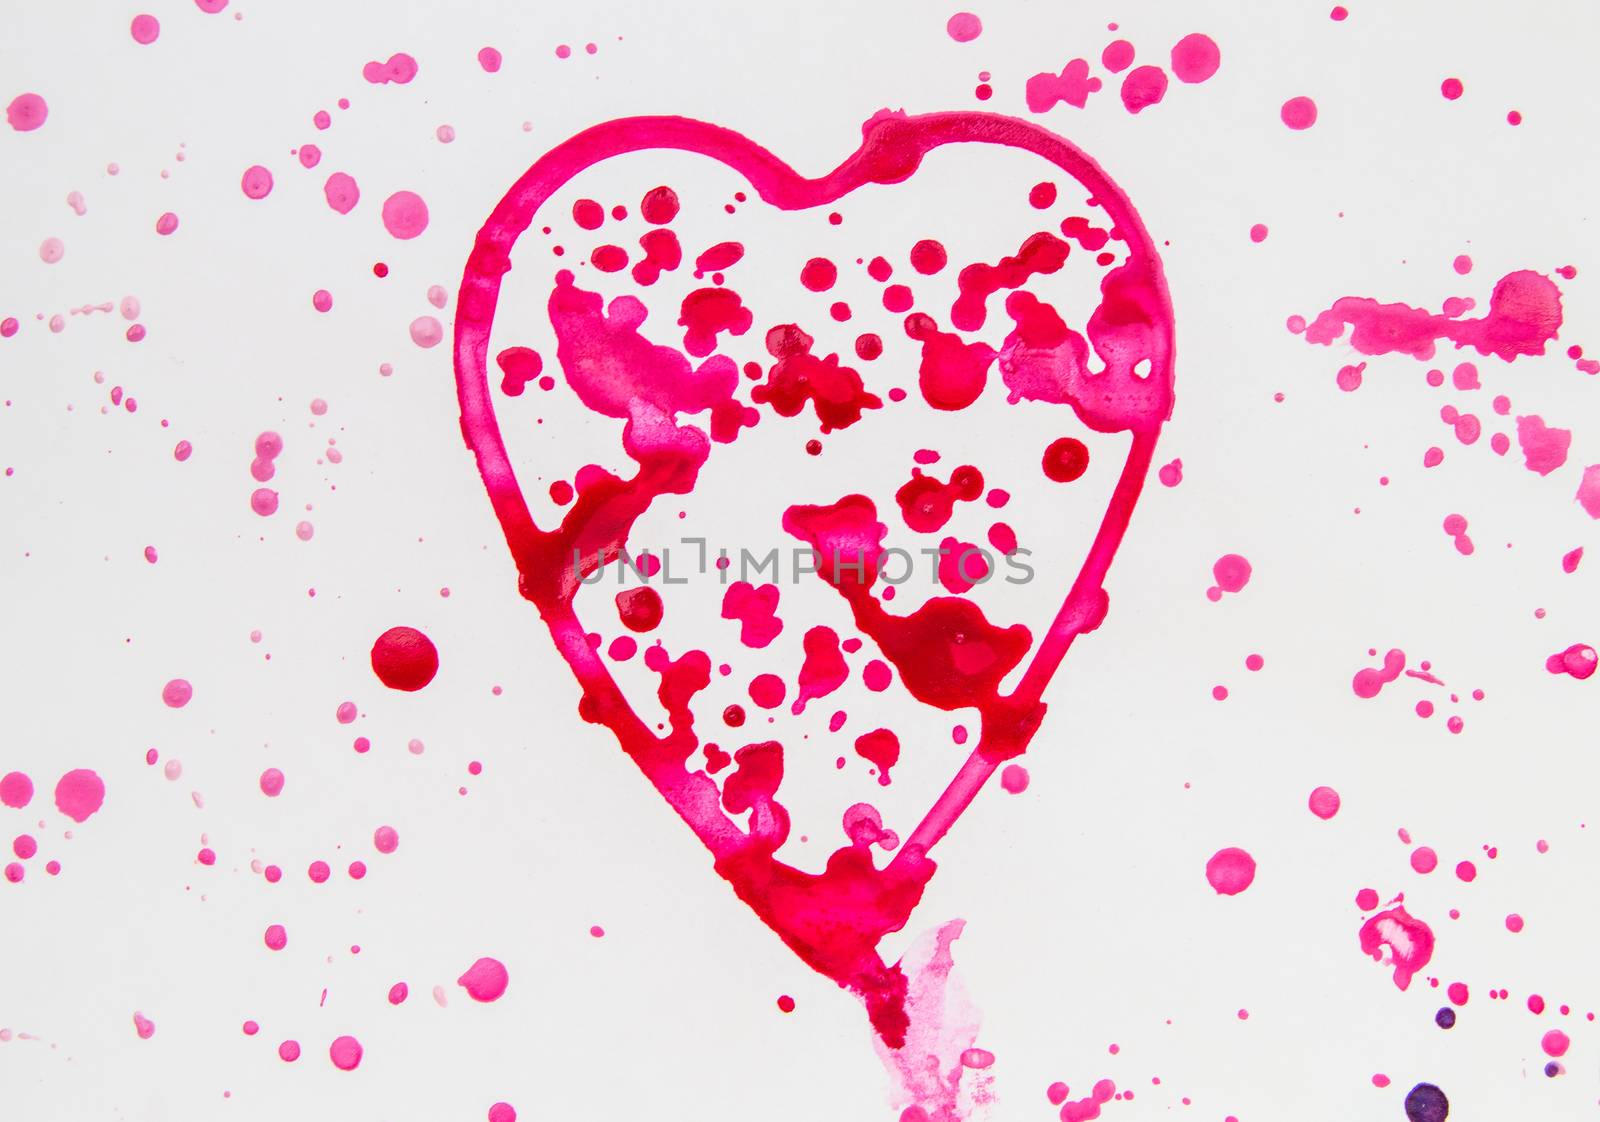 Heart with splashes of red watercolor on white background, cute, pattern, hand-painted by claire_lucia